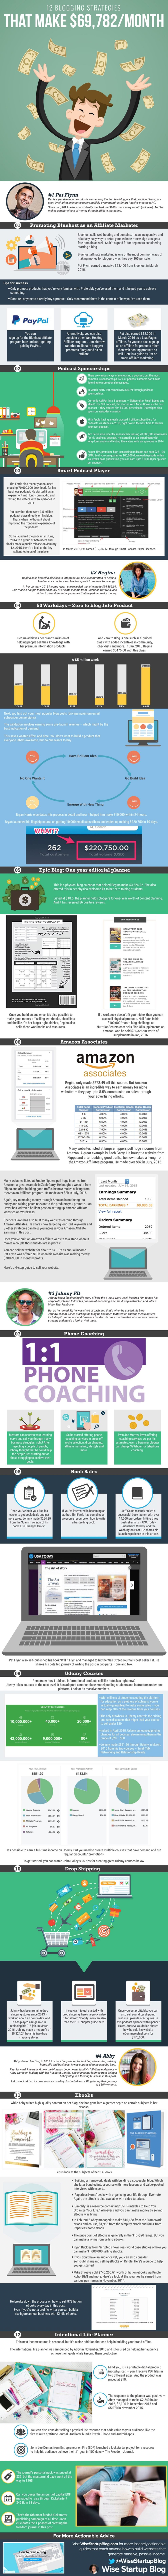 How to Start a Blog That Makes $124,407 [Infographic] 